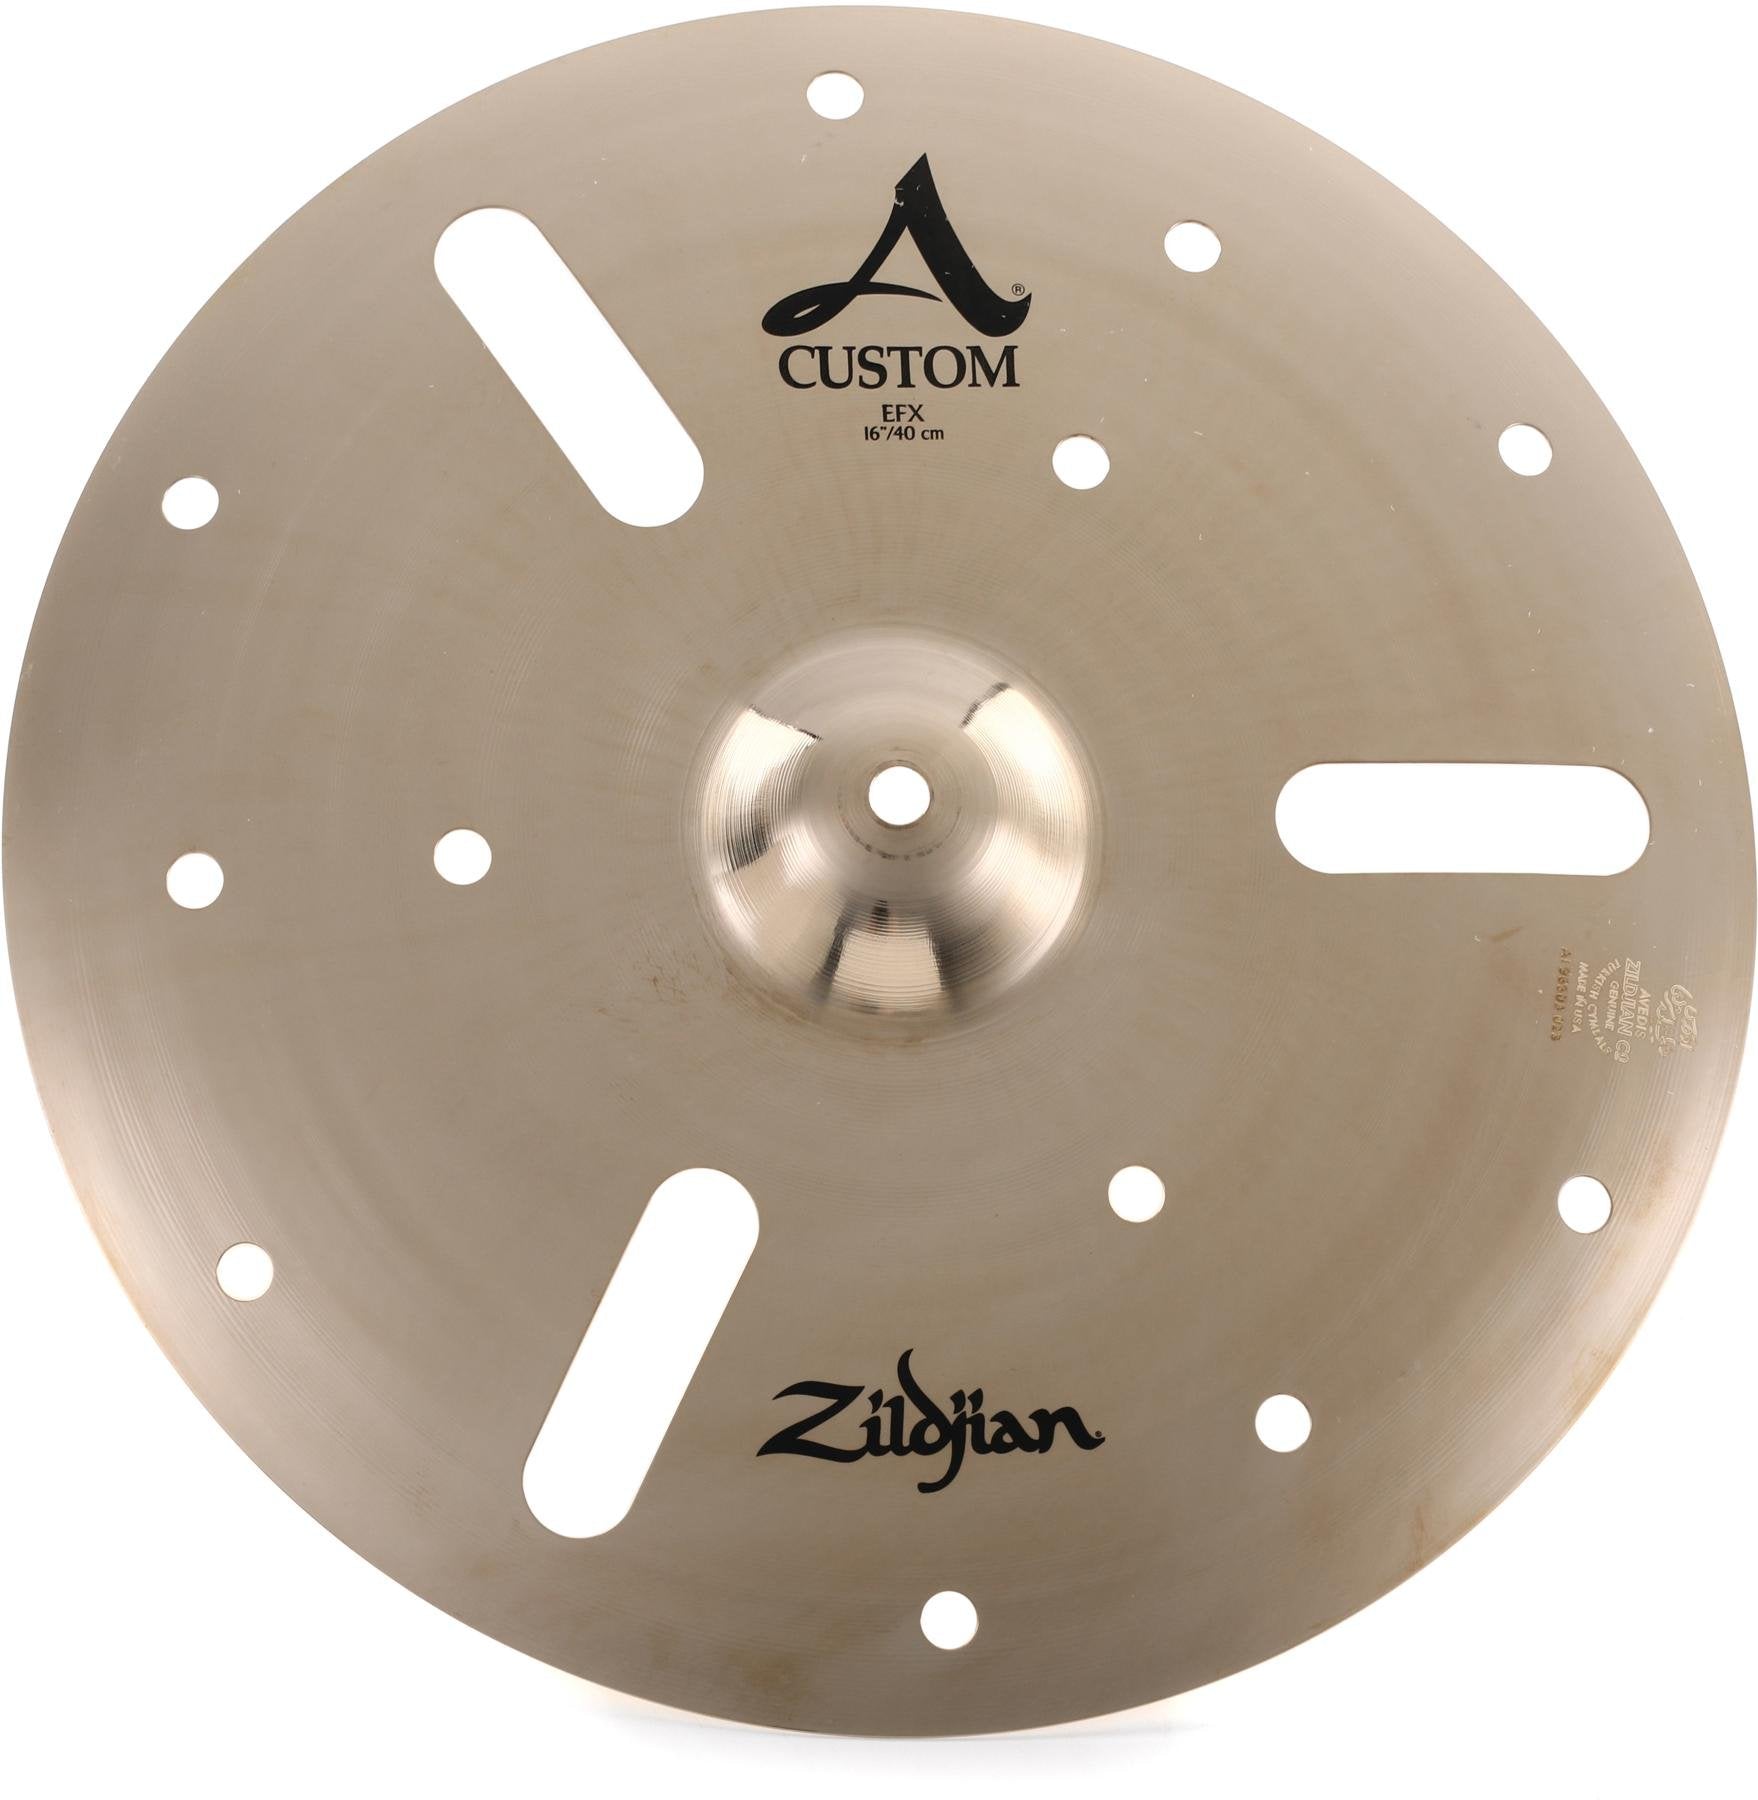 ZILDJIAN A Custom EFX Cymbal (Available in various sizes)